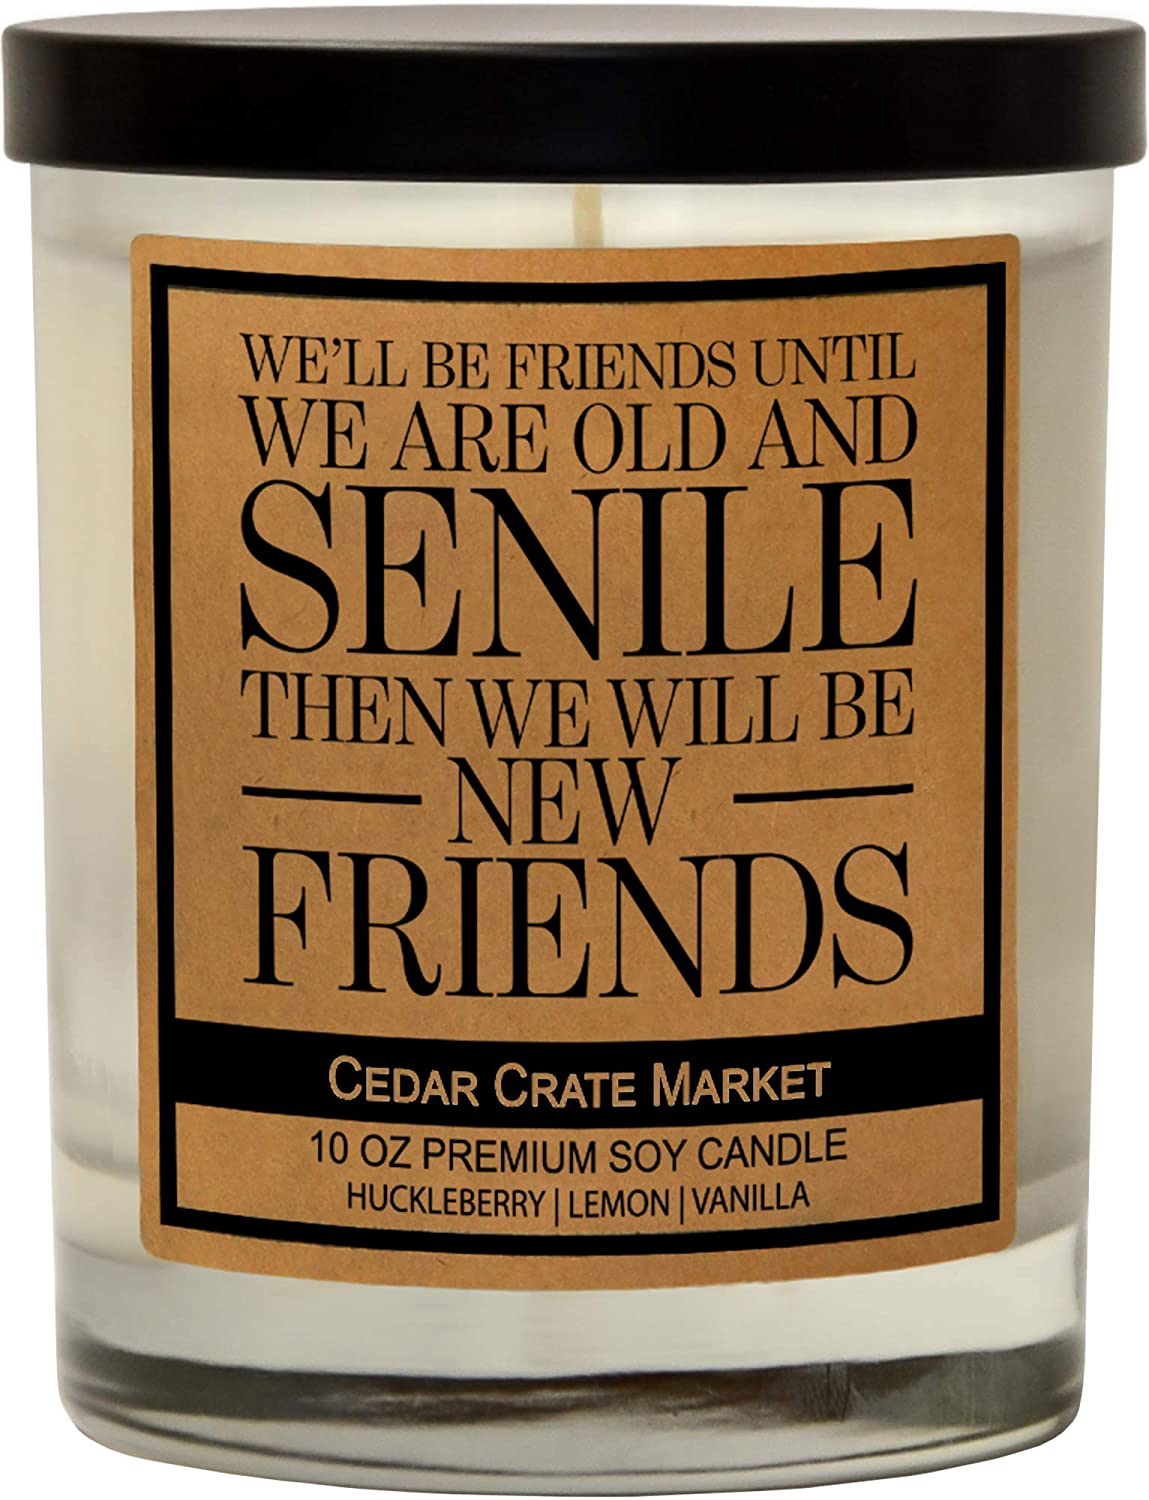 Best friend candle